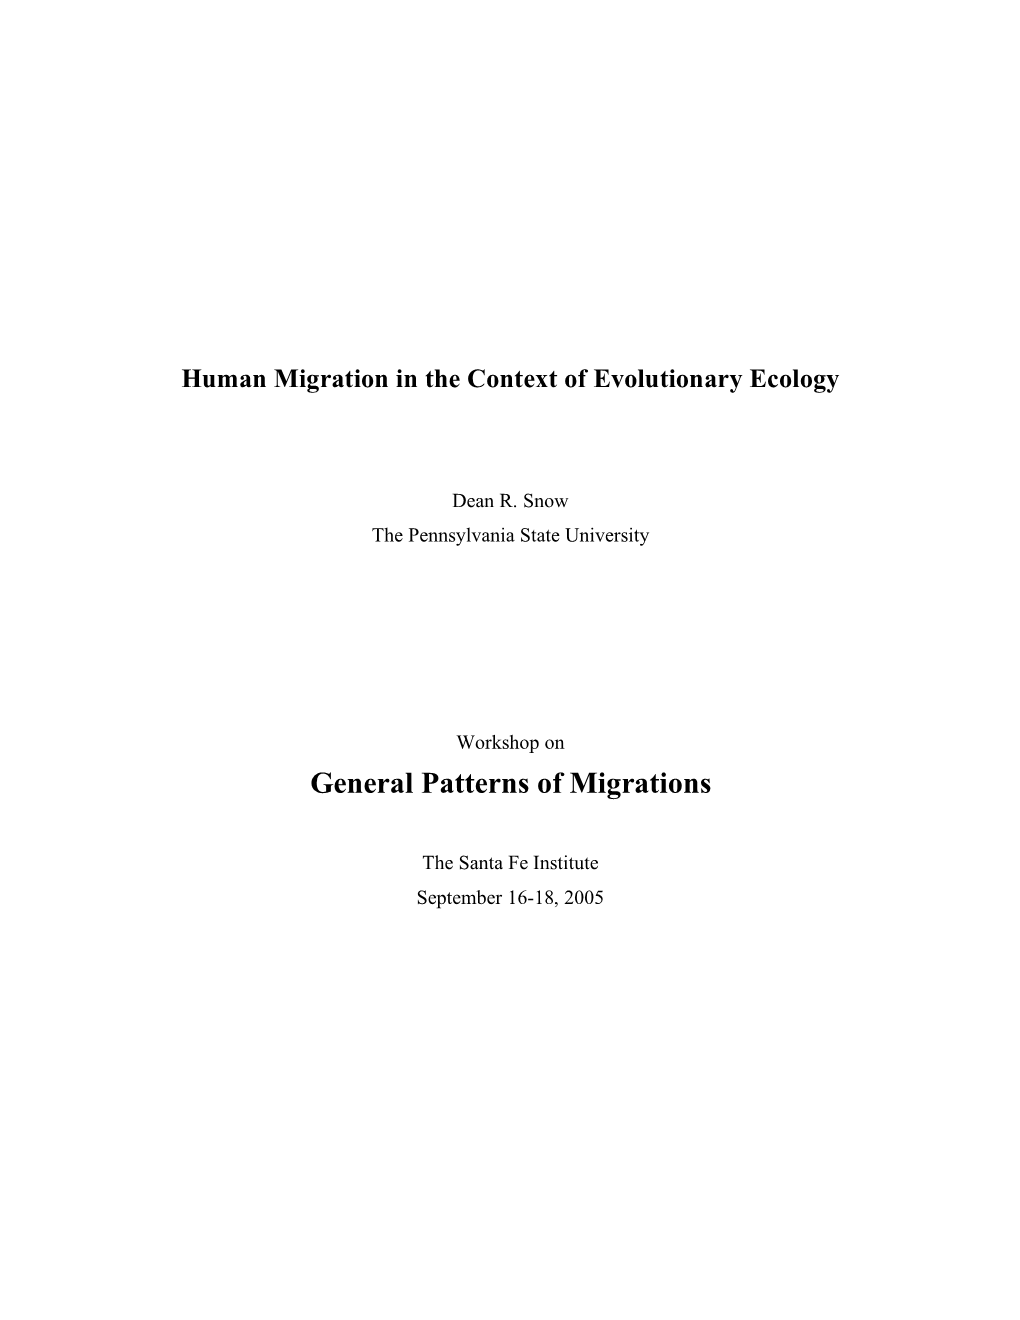 Human Migration in the Context of Evolutionary Ecology